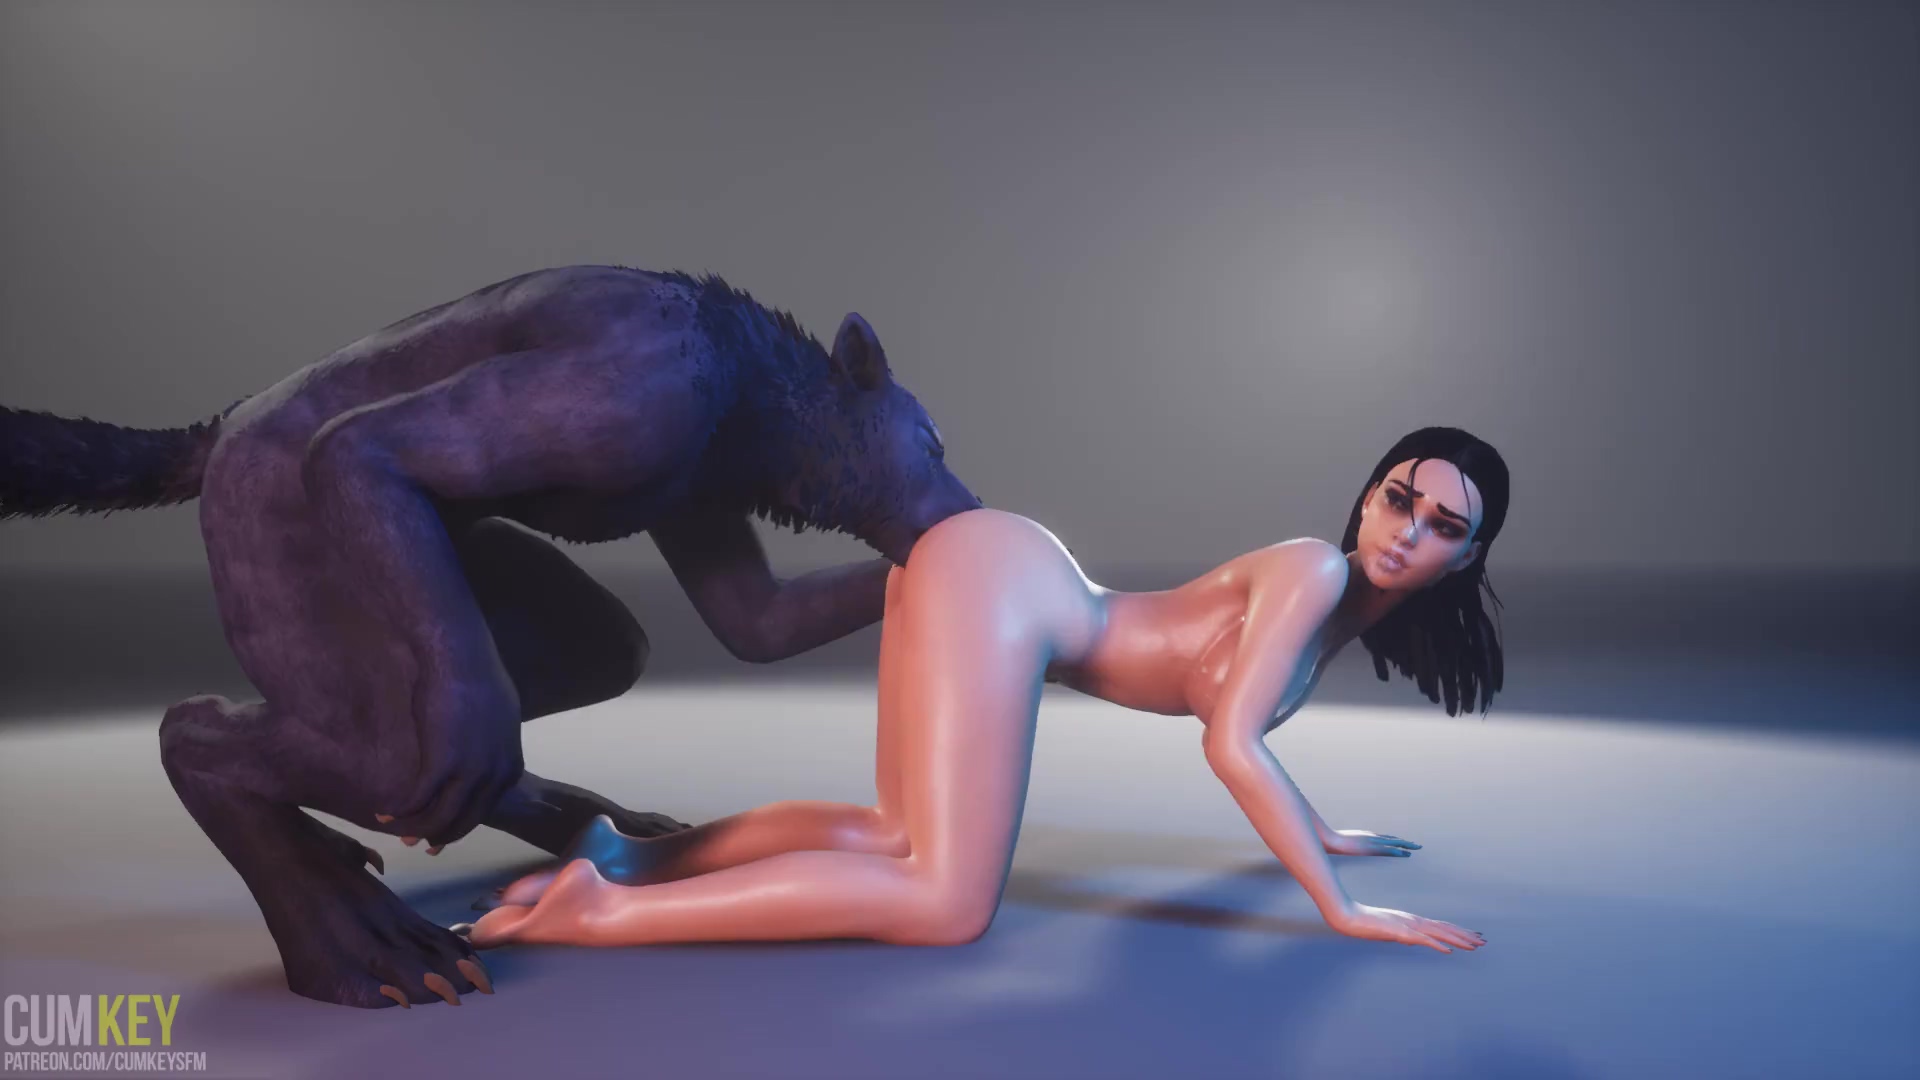 3d Porn Petite Brunette - Hot 3D porn Animation: Slim Petite Brunette Hottie Gets Fucked And  Impregnated By a Horny Werewolf